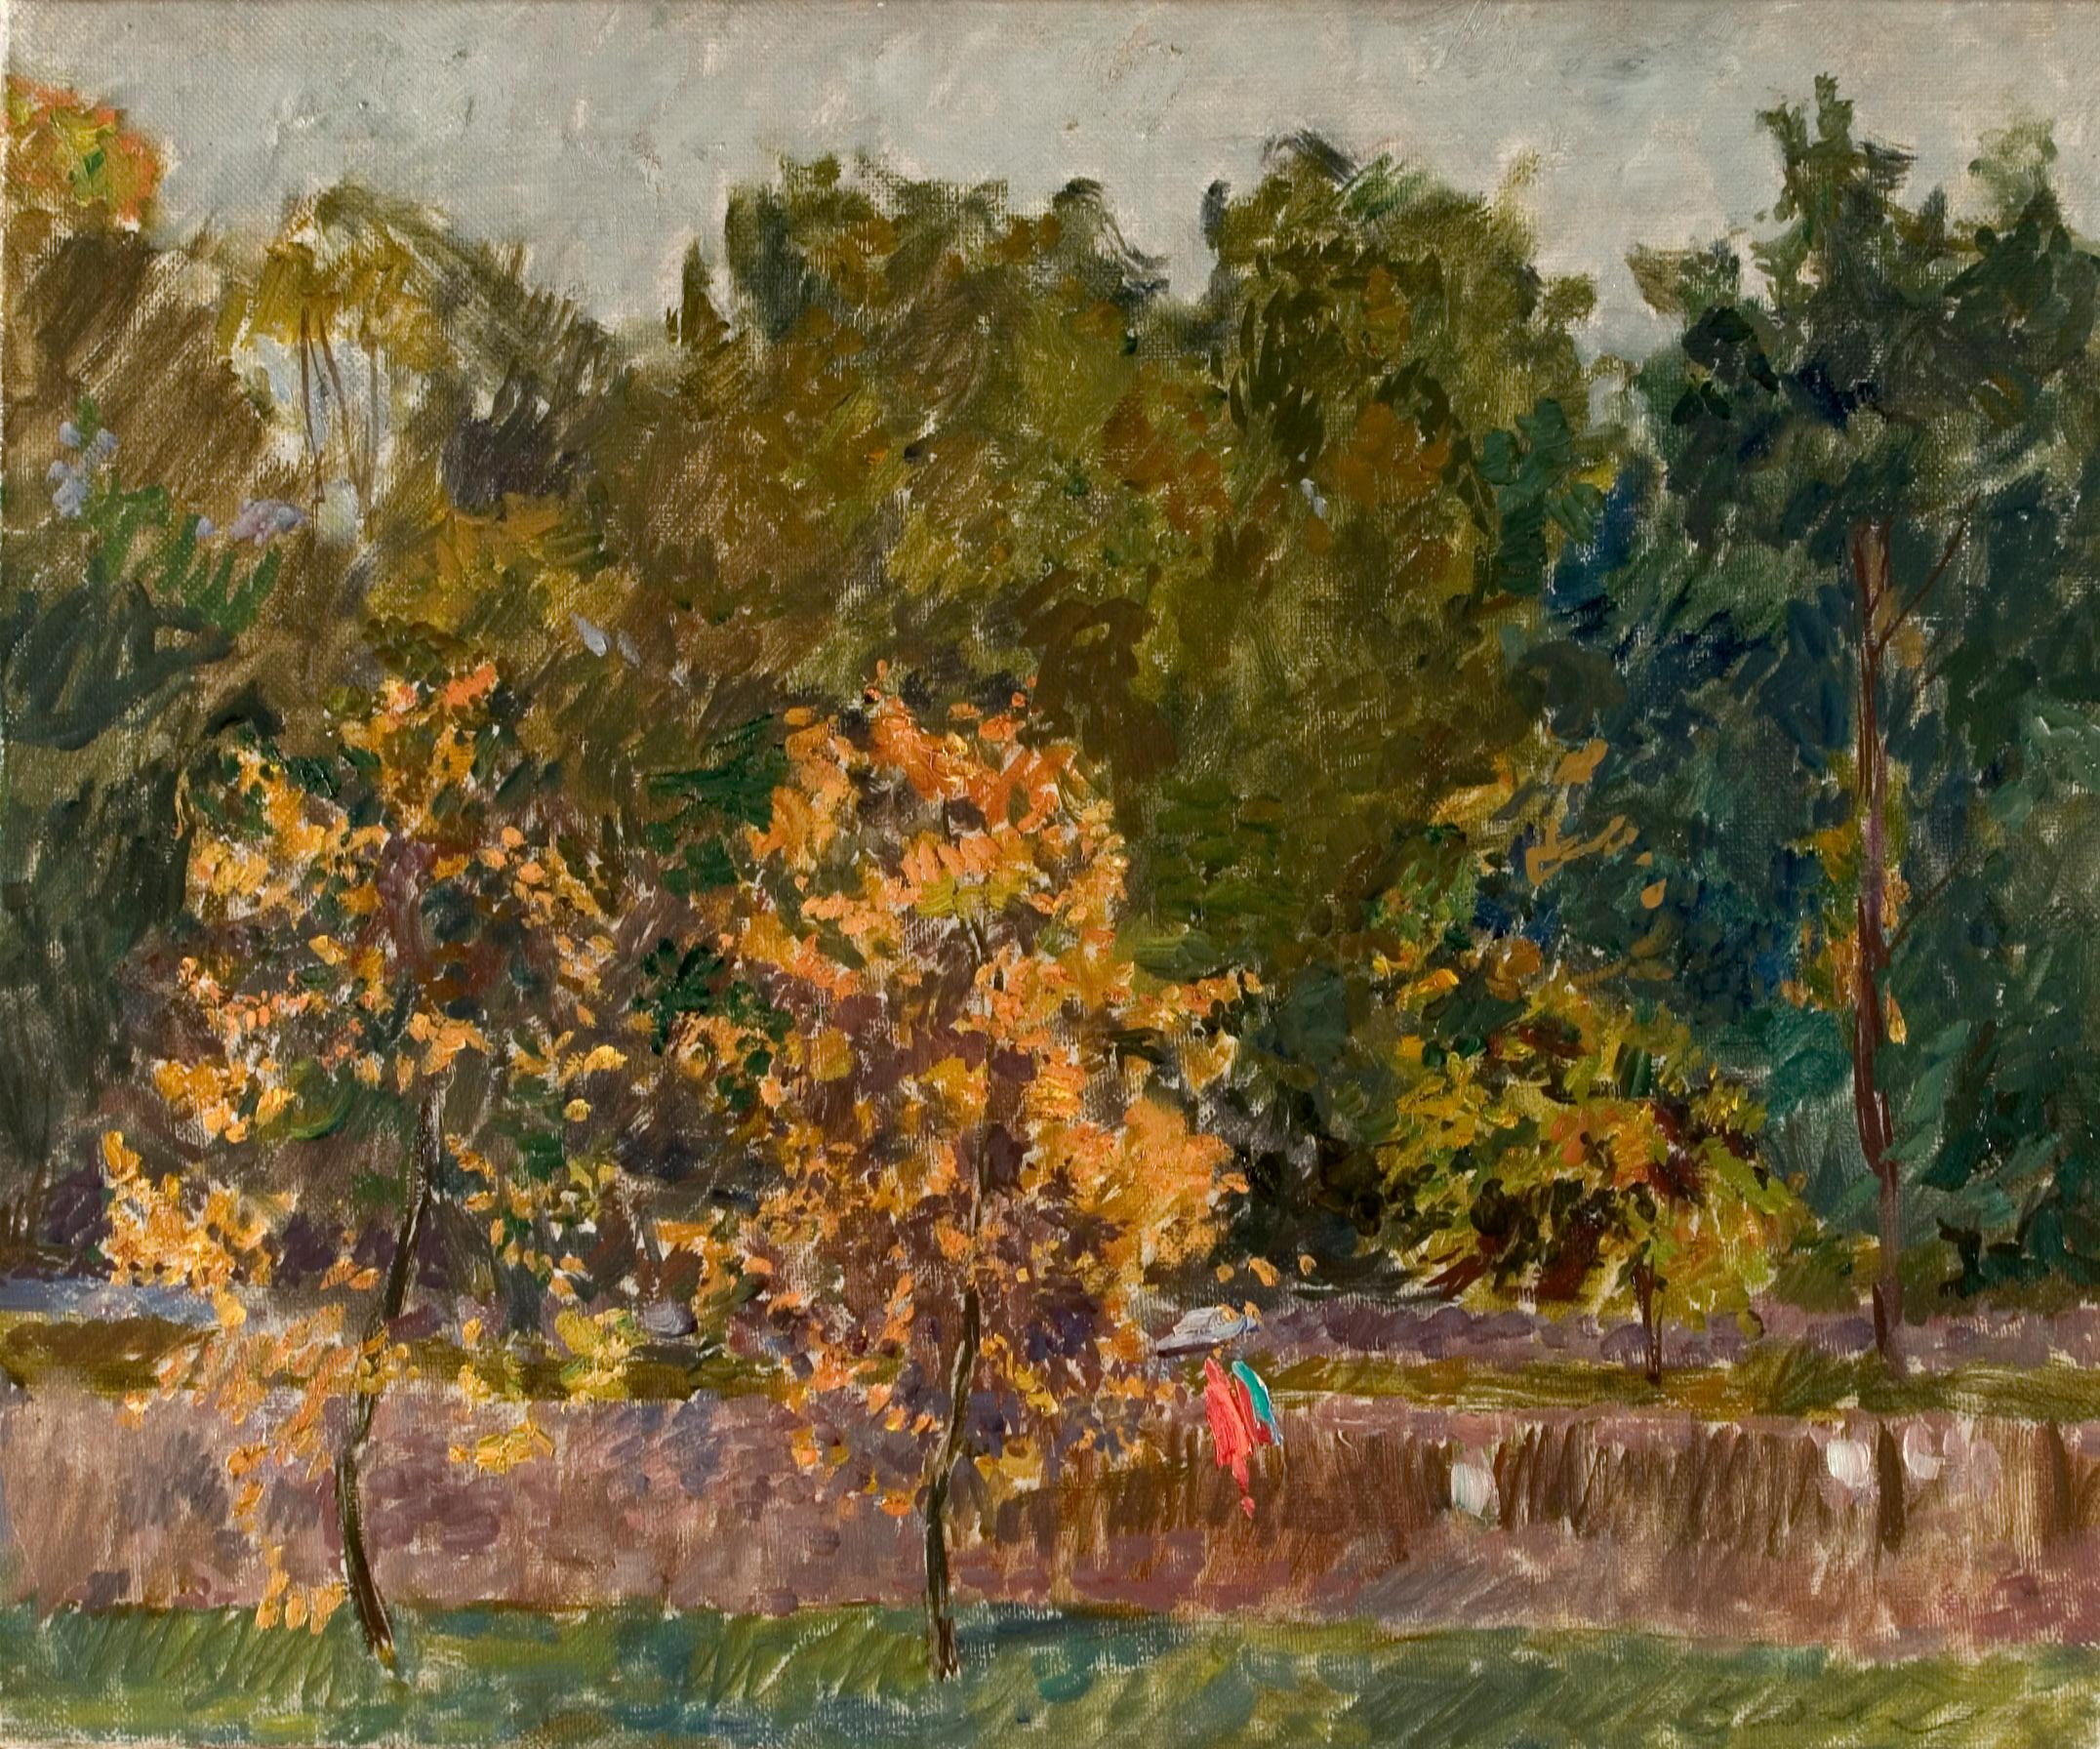 Vyacheslav Zabelin (1935- 2001) Considered a living master during his lifetime in Moscow, painted Autumn in 1998. Zabelin had already 300 paintings in museum collections throughout the world at the time of his death. A Surikov professor and an